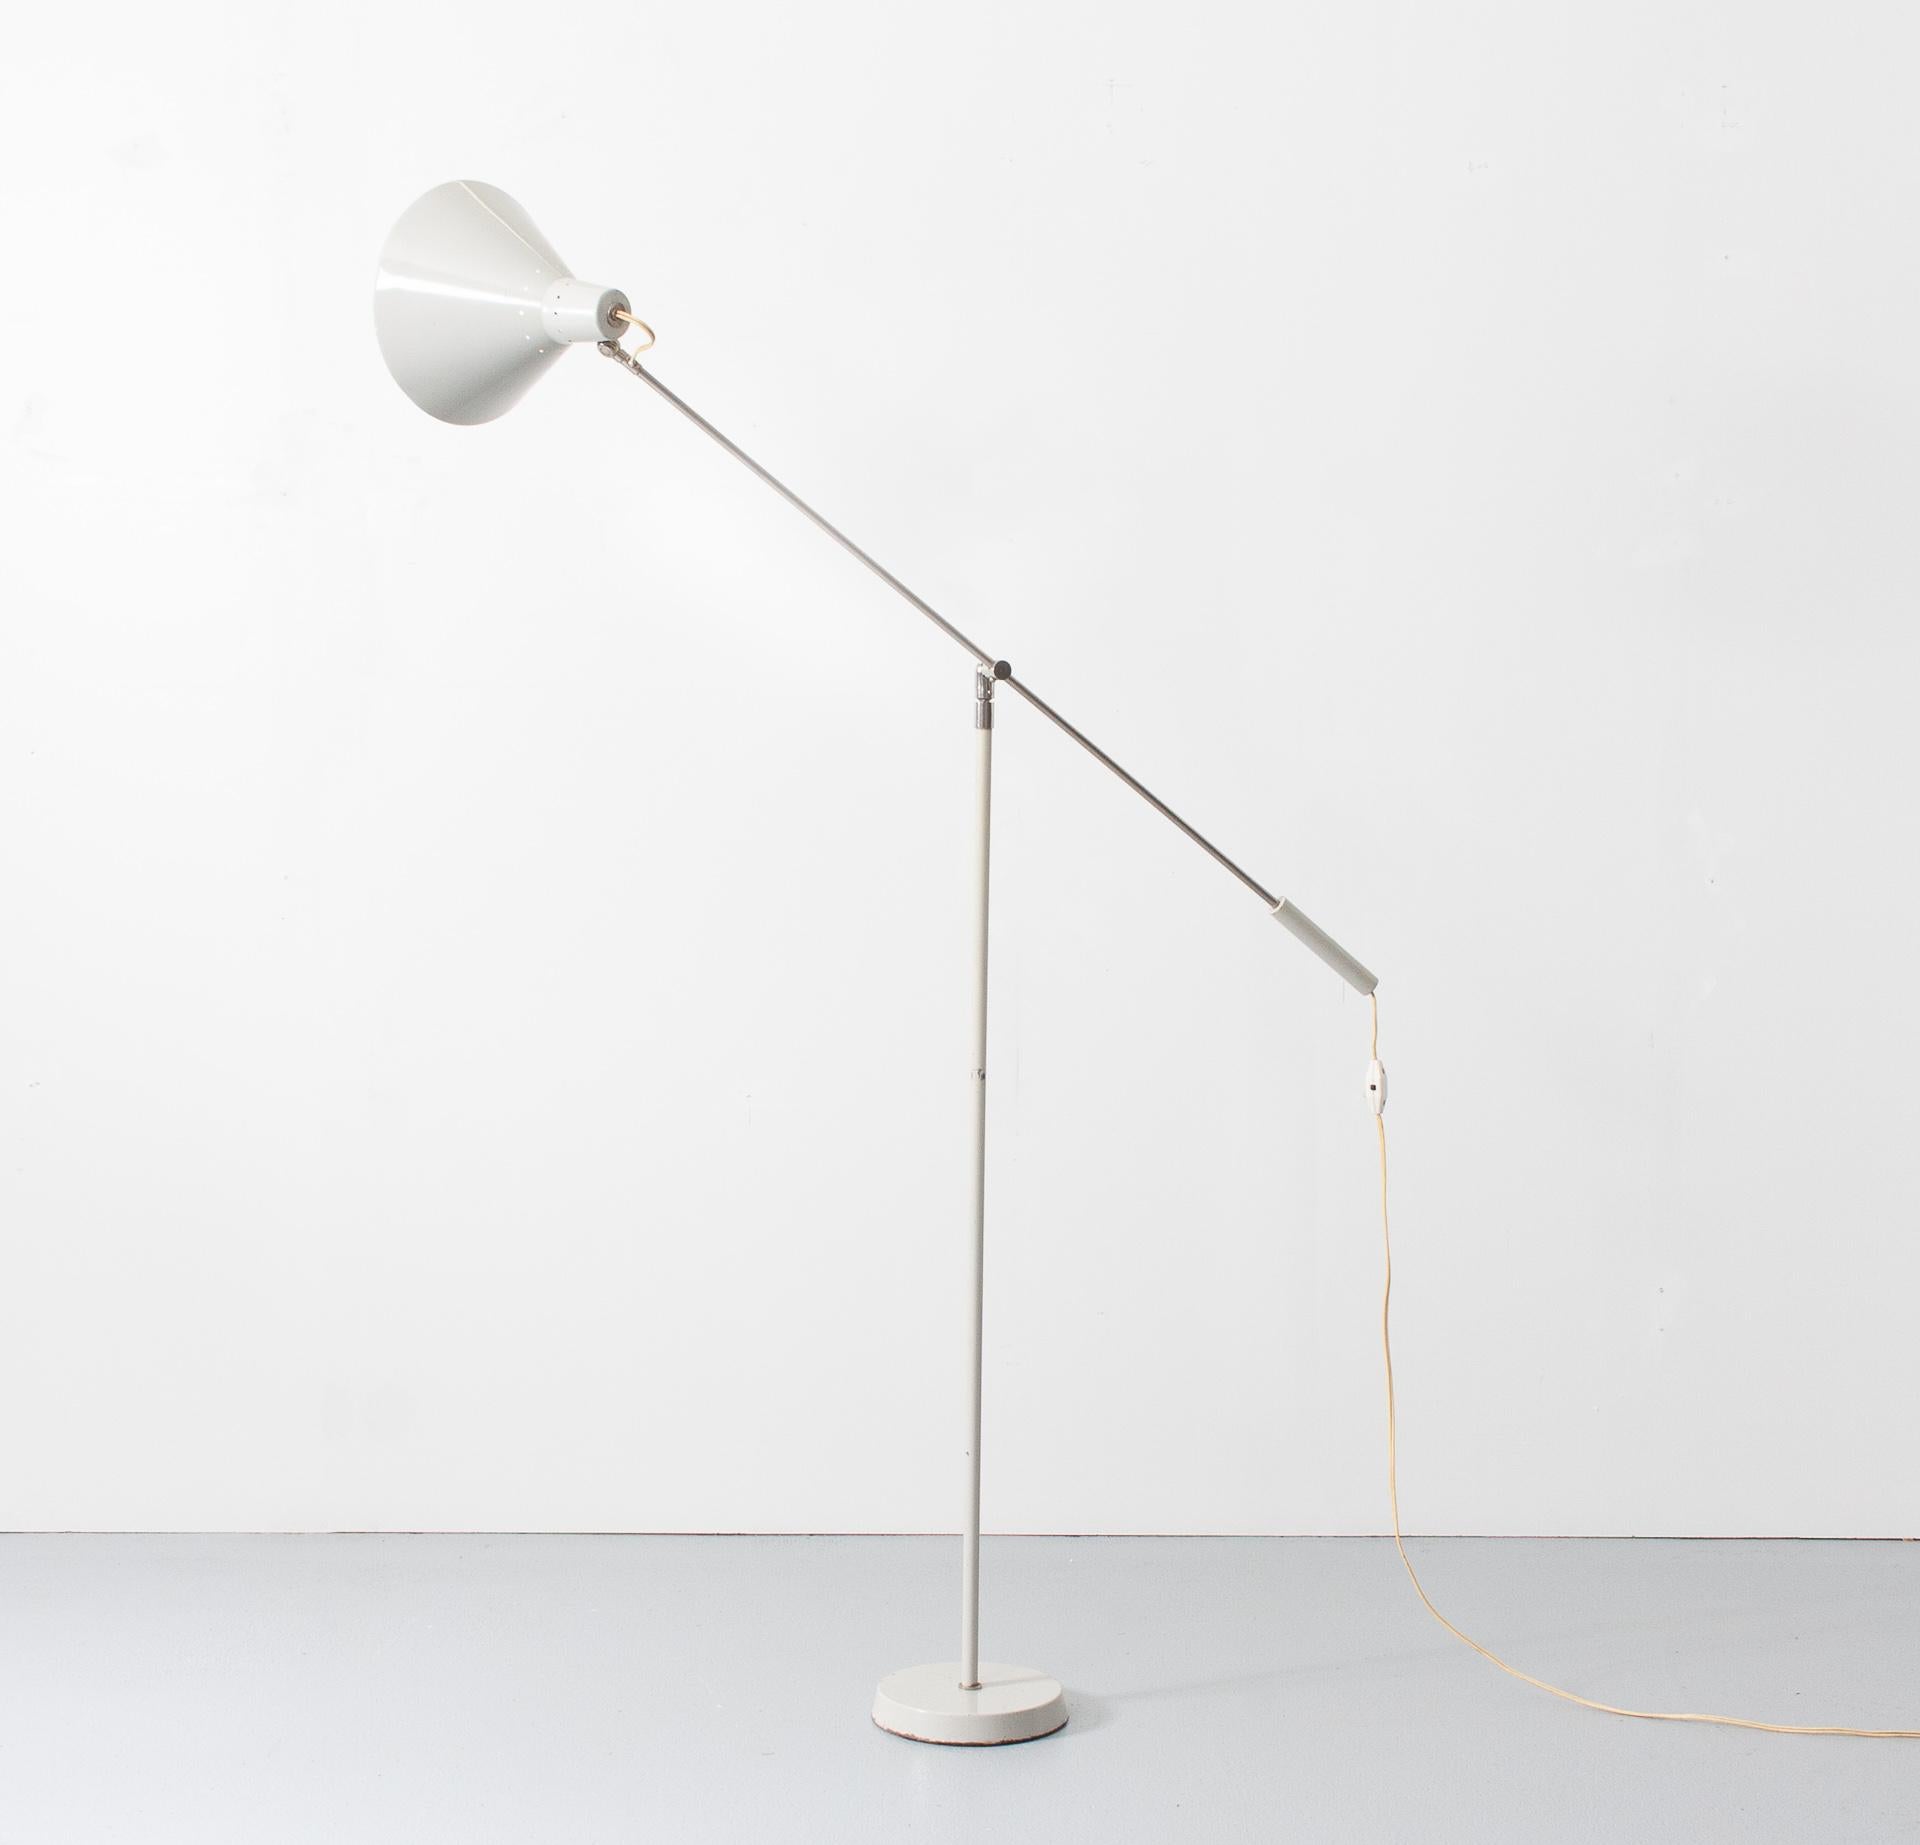 Very rare floor lamp attributed to H Fillekes for Artiforte 1950s. Very unusual bal joint, to clap
side ways, also adjustable in hight by turn the screw loose. Never see this model. The Magneto floor lamp
by H Fillekes used the same components. A